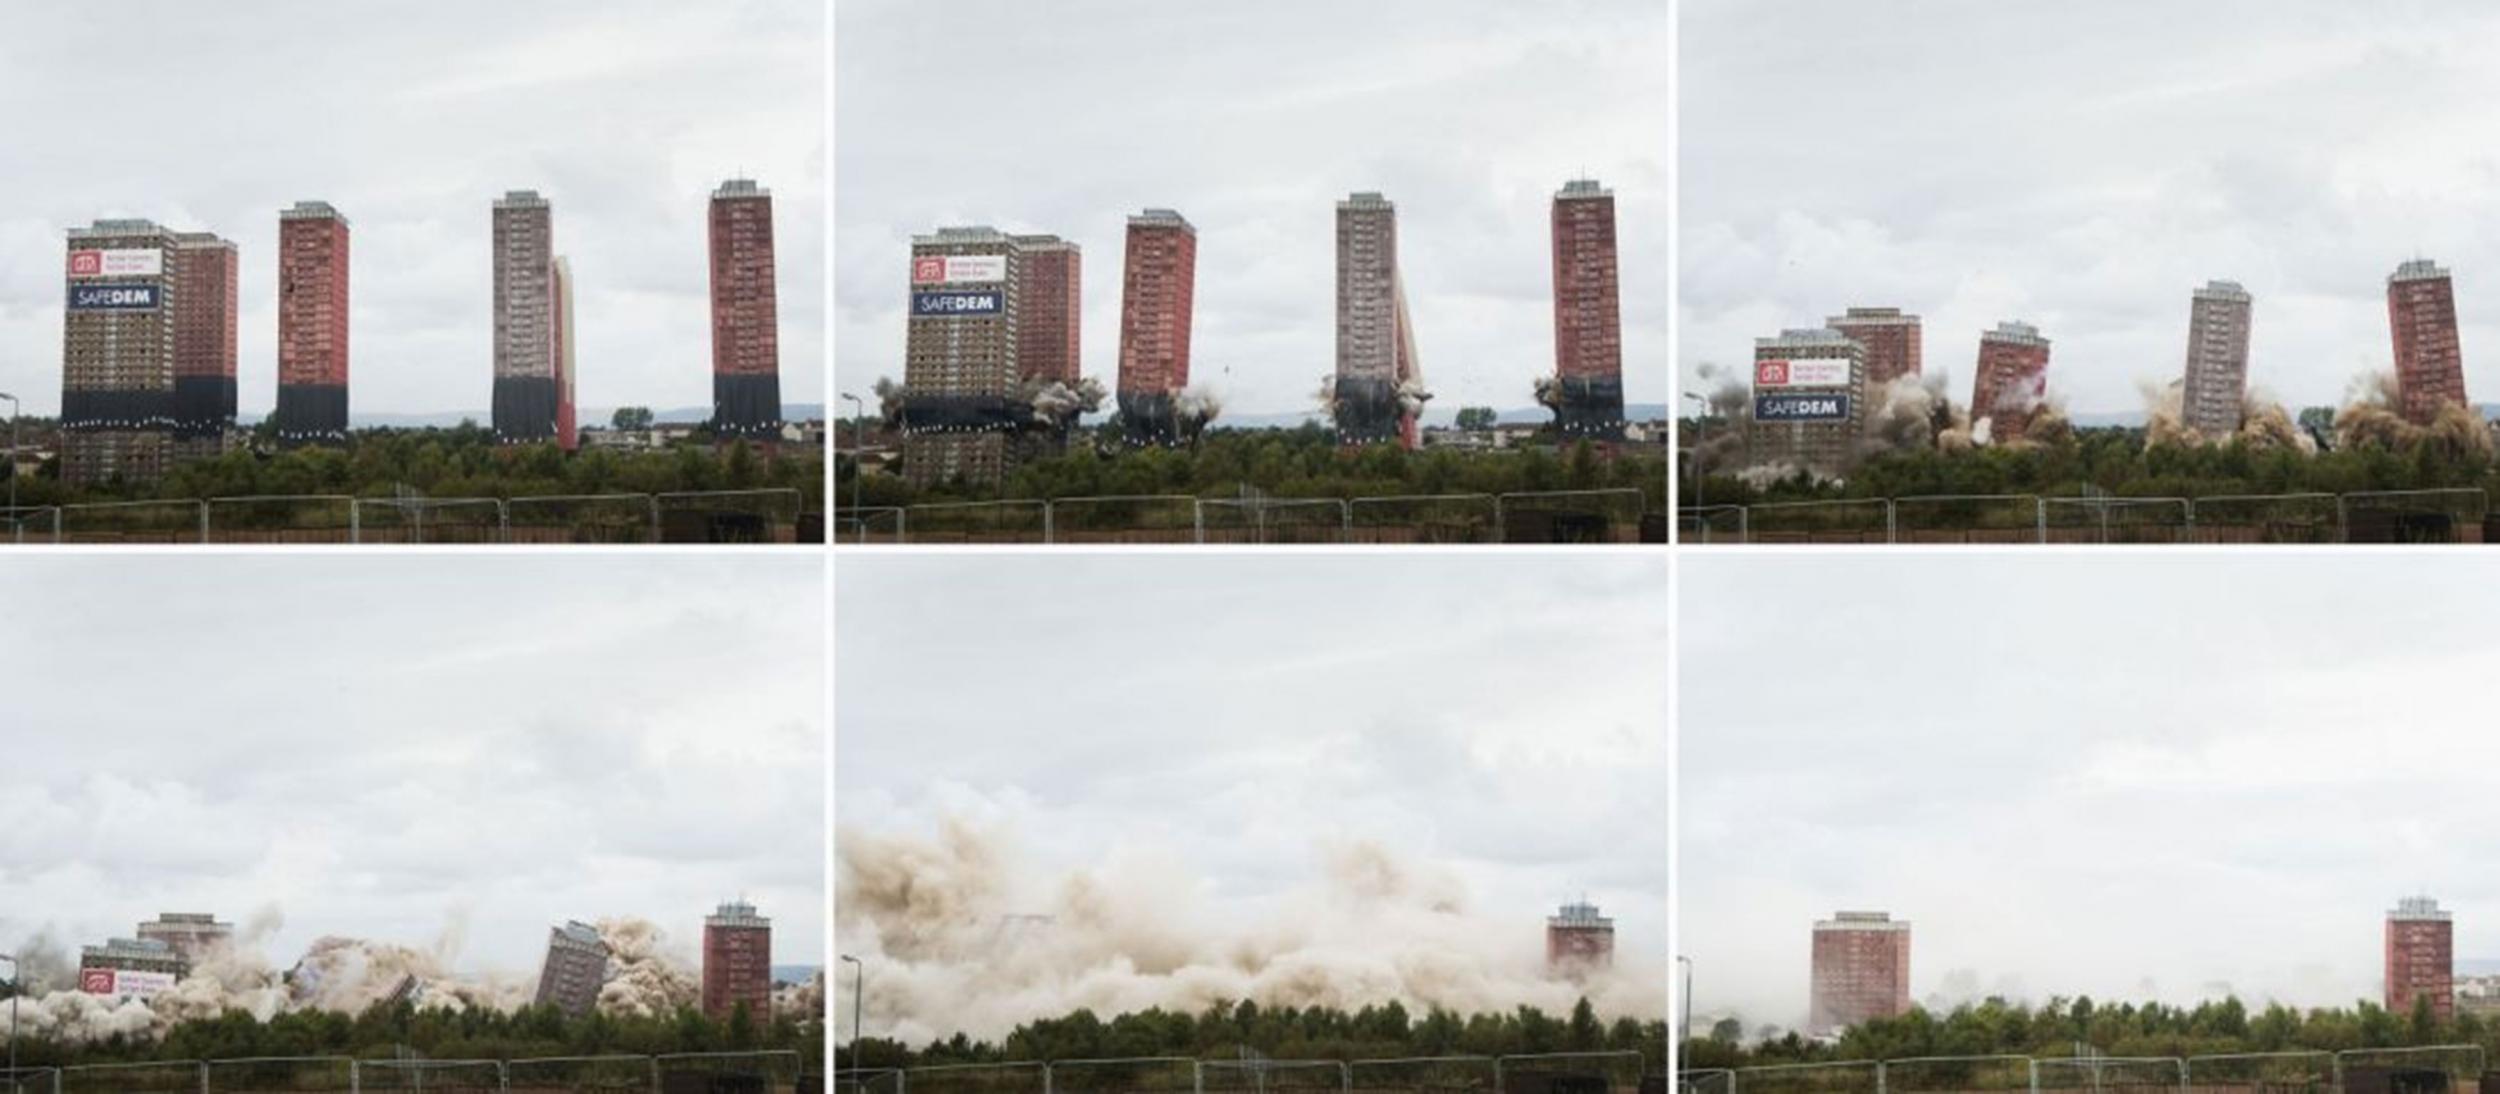 Composite photograph showing six Red Road multi-storey flats being demolished in a controlled explosion in Glasgow, Scotland, as part of Glasgow Housing Association's plan to regenerate communities across the city.